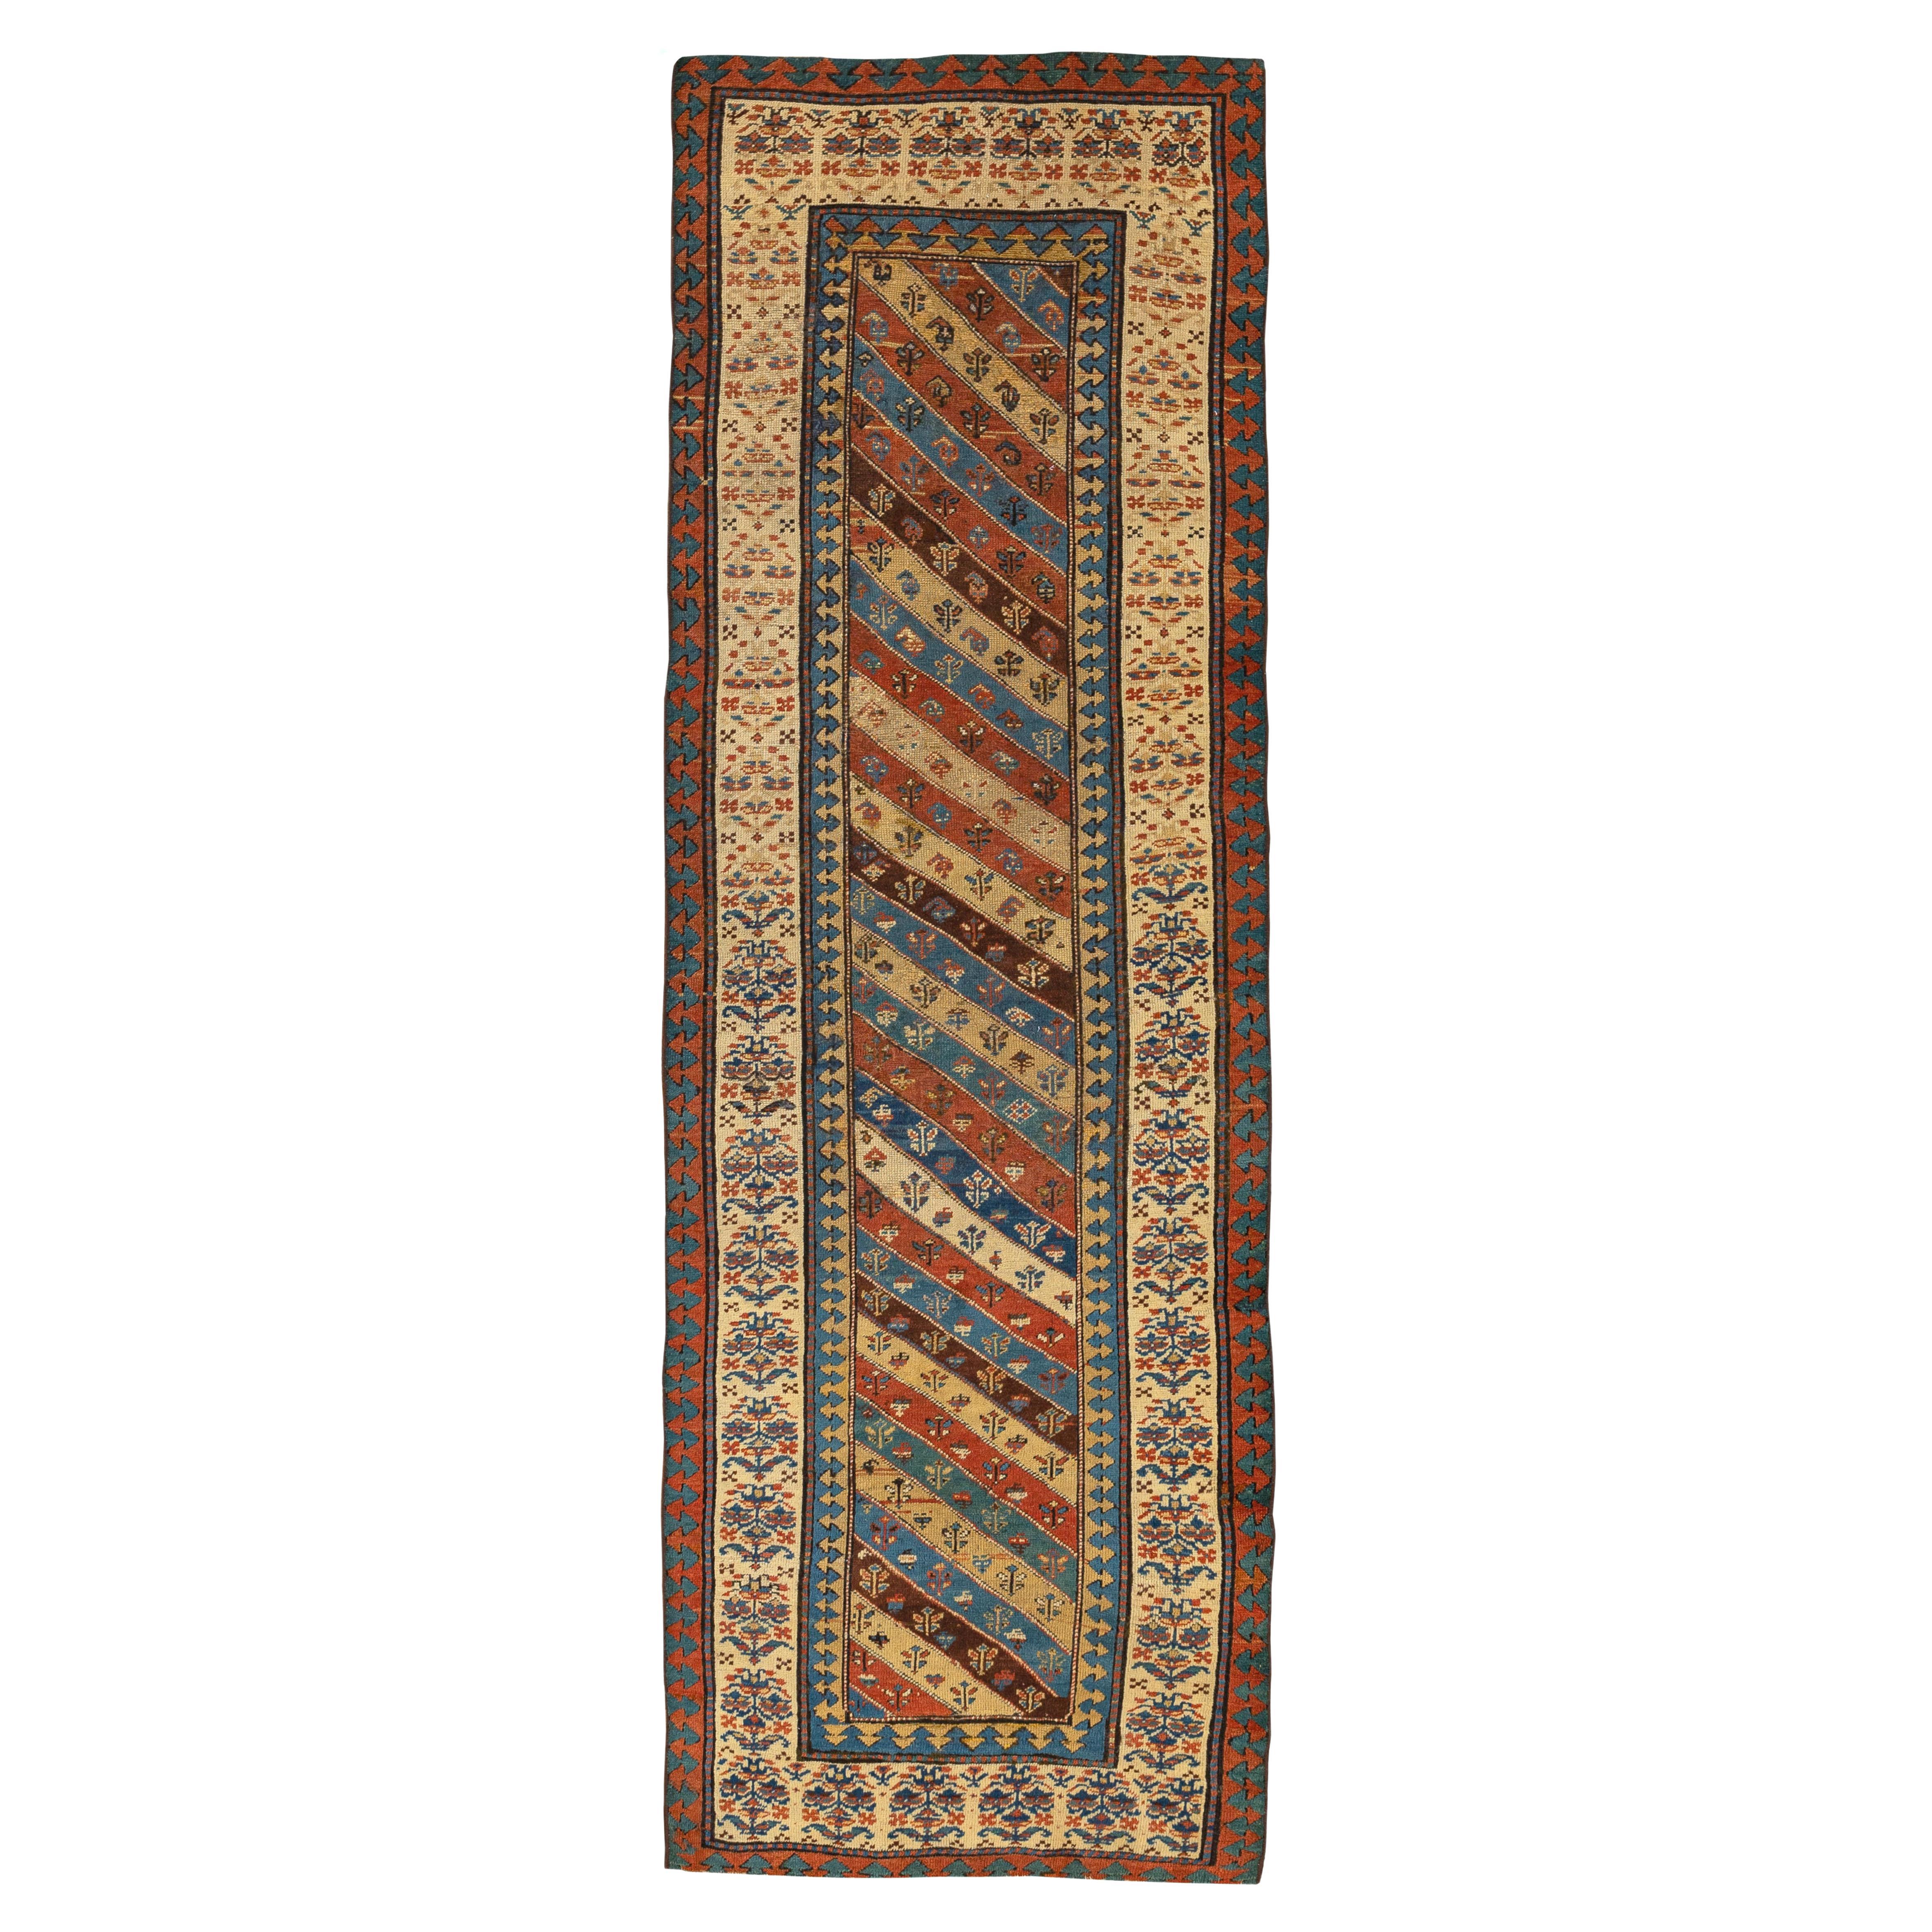 Gendje – South Caucasus 
This Gendje rug from the mountainous region features a delicate diagonal stripe design. The stripes are populated with floral motifs and geometric figures in dazzling colours. Its striking shades of blue, red, indigo and